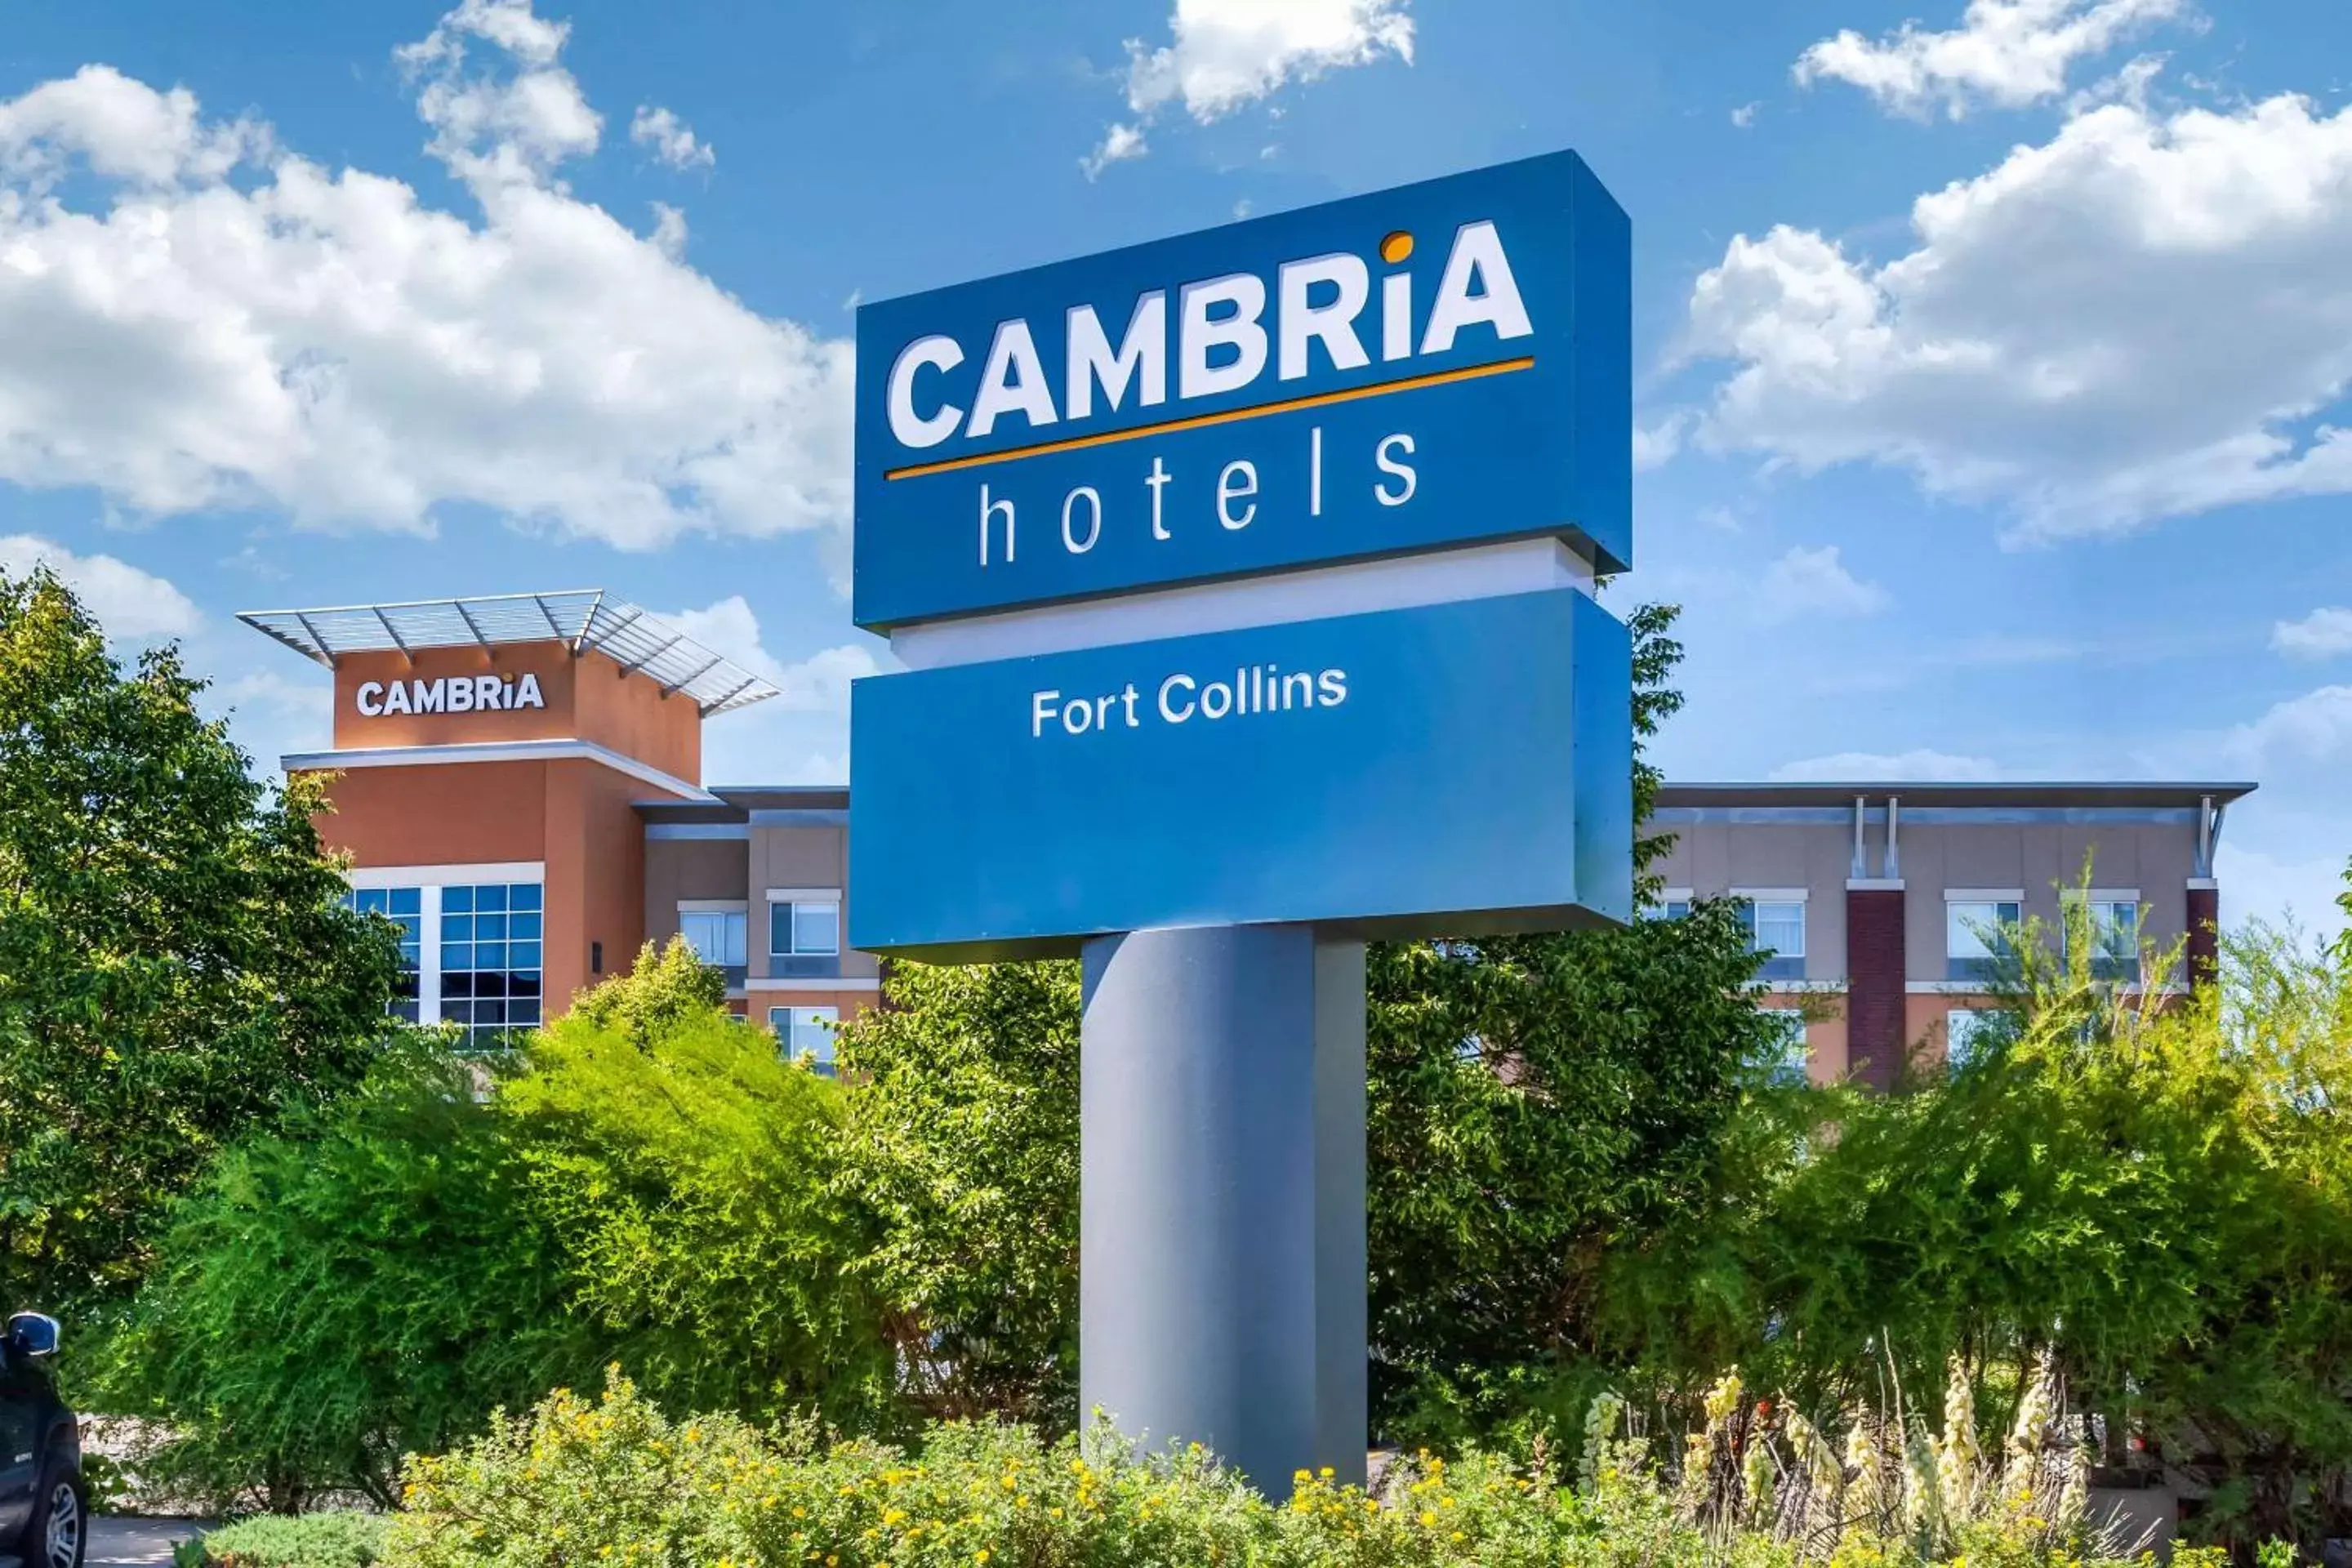 Property building in Cambria Hotel Ft Collins